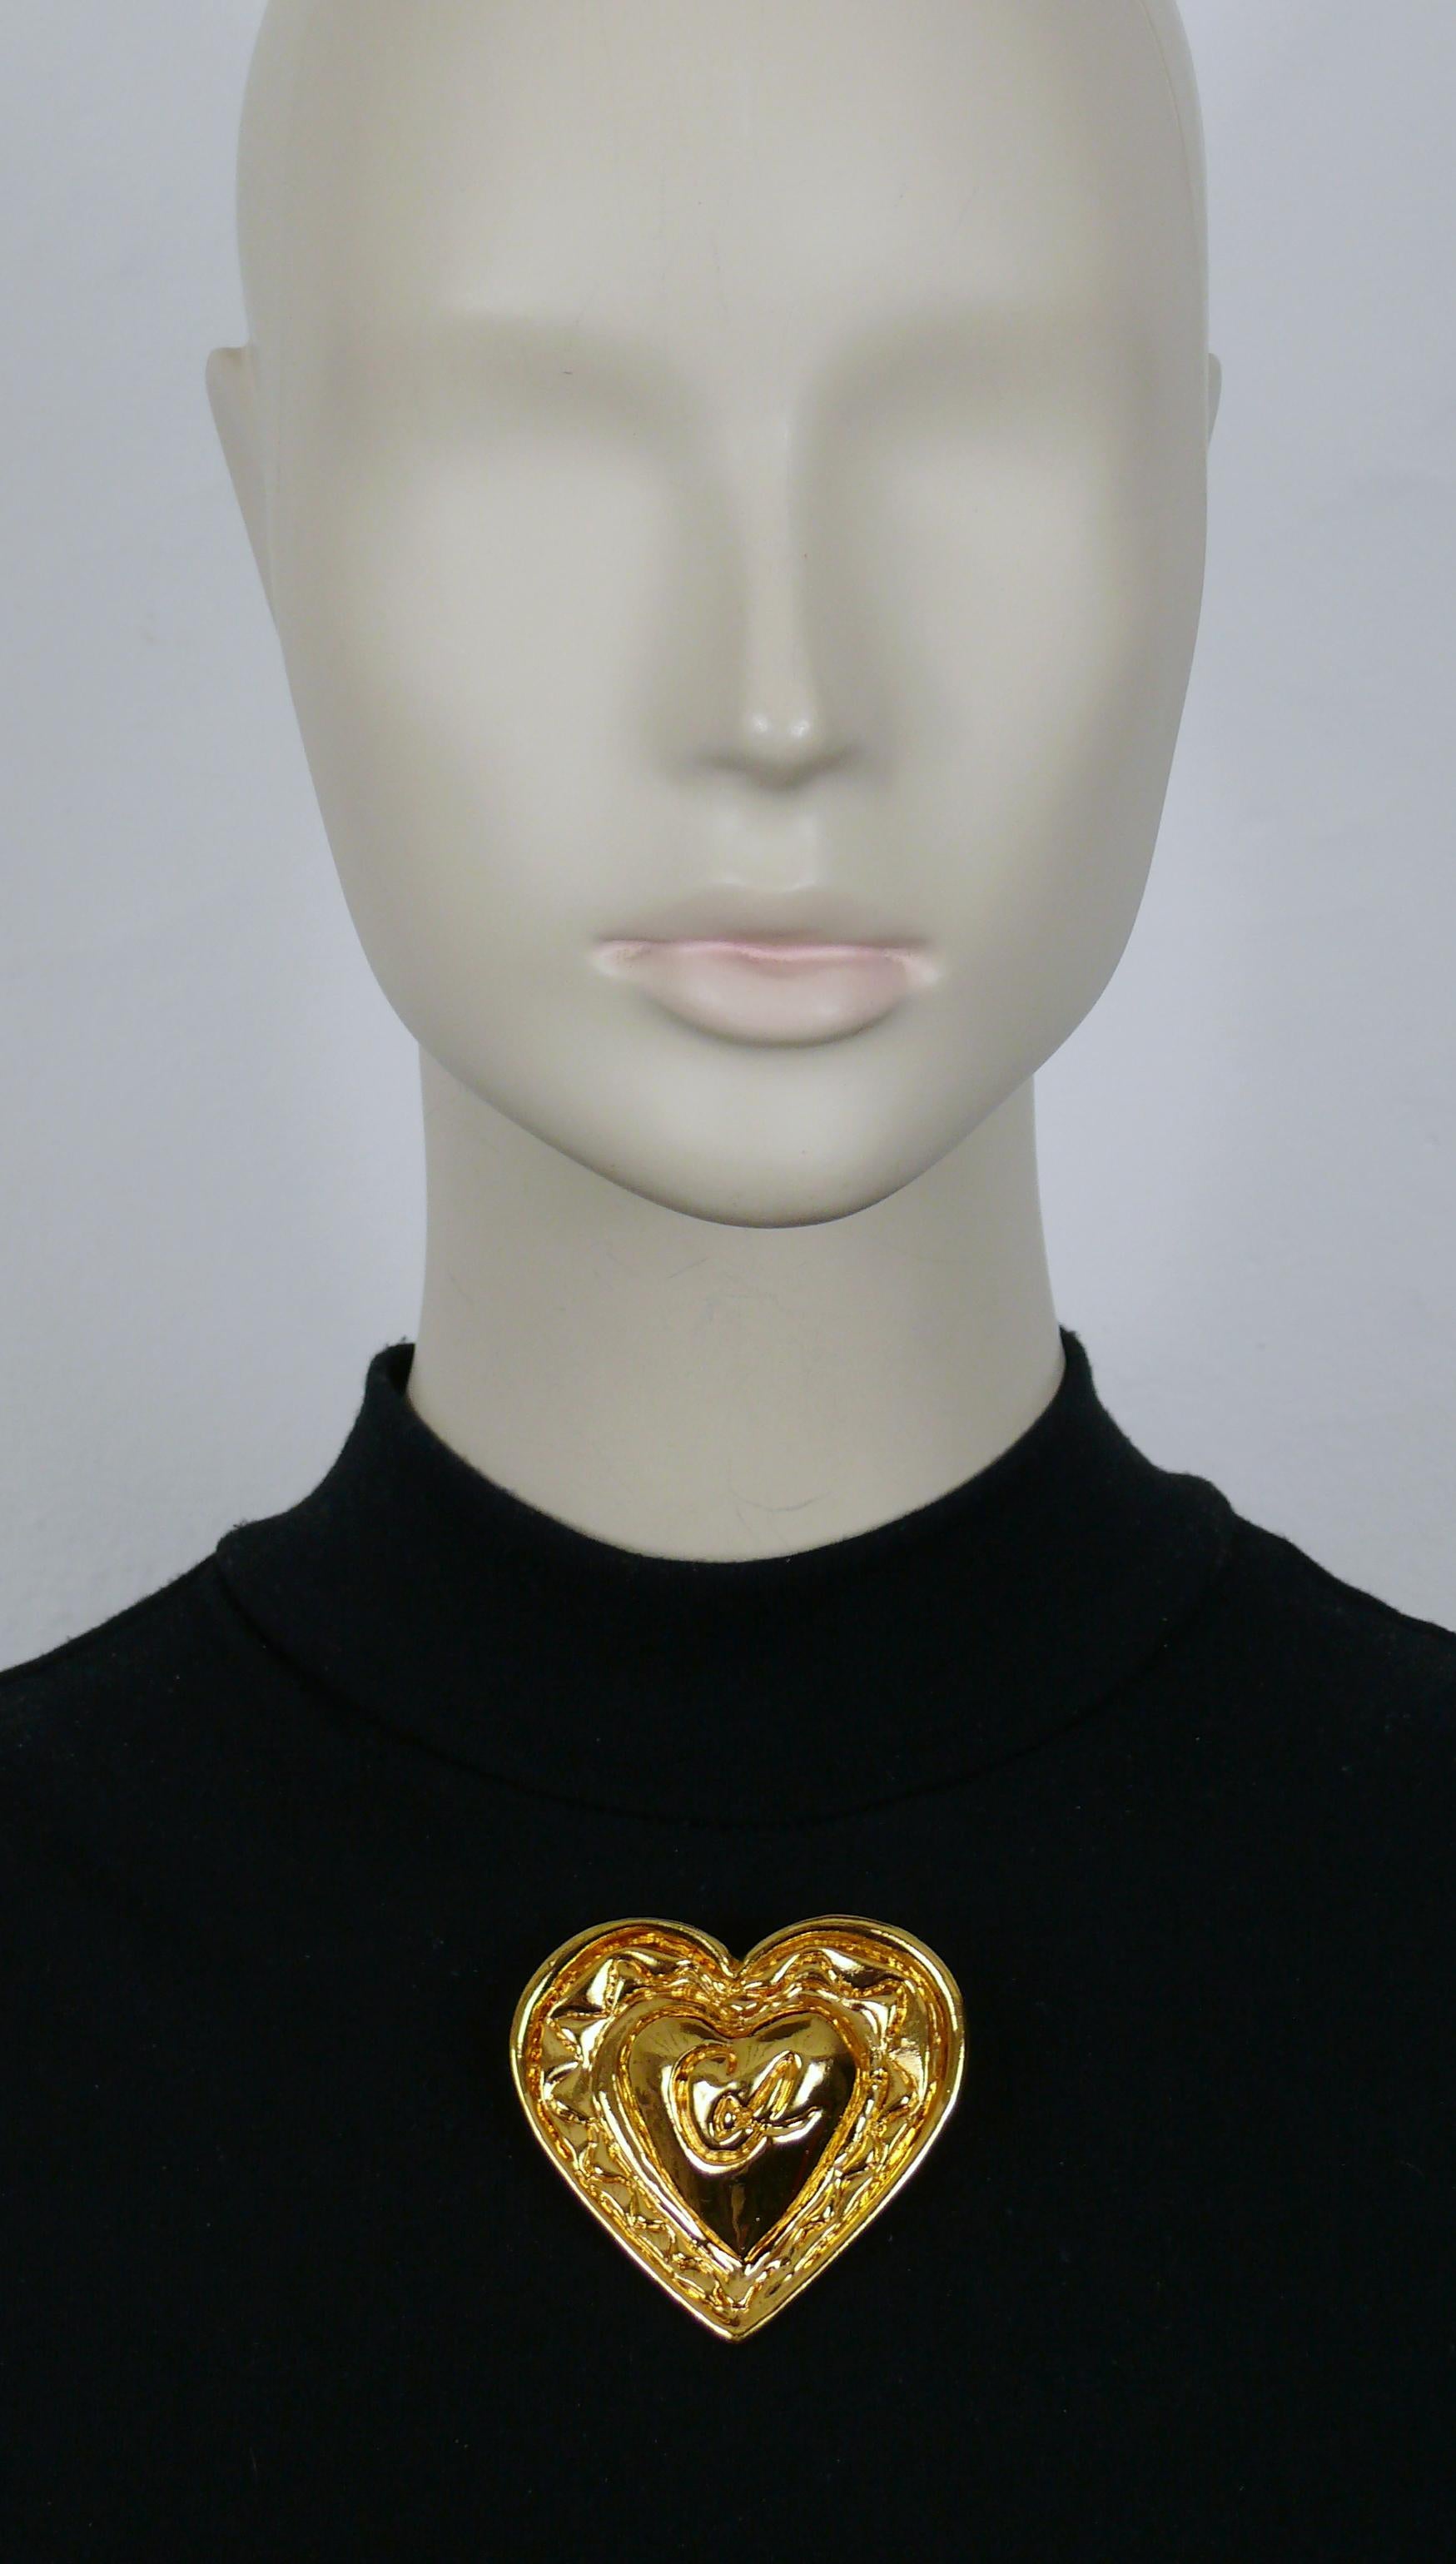 CHRISTIAN LACROIX vintage gold tone resin heart brooch.

Marked CHRISTIAN LACROIX CL Made in France.

Indicative measurements : max. height approx. 6.2 cm (2.44 inches) / max. width approx. 6.4 cm (2.52 inches).

Material : Gold tone resin.

NOTES
-